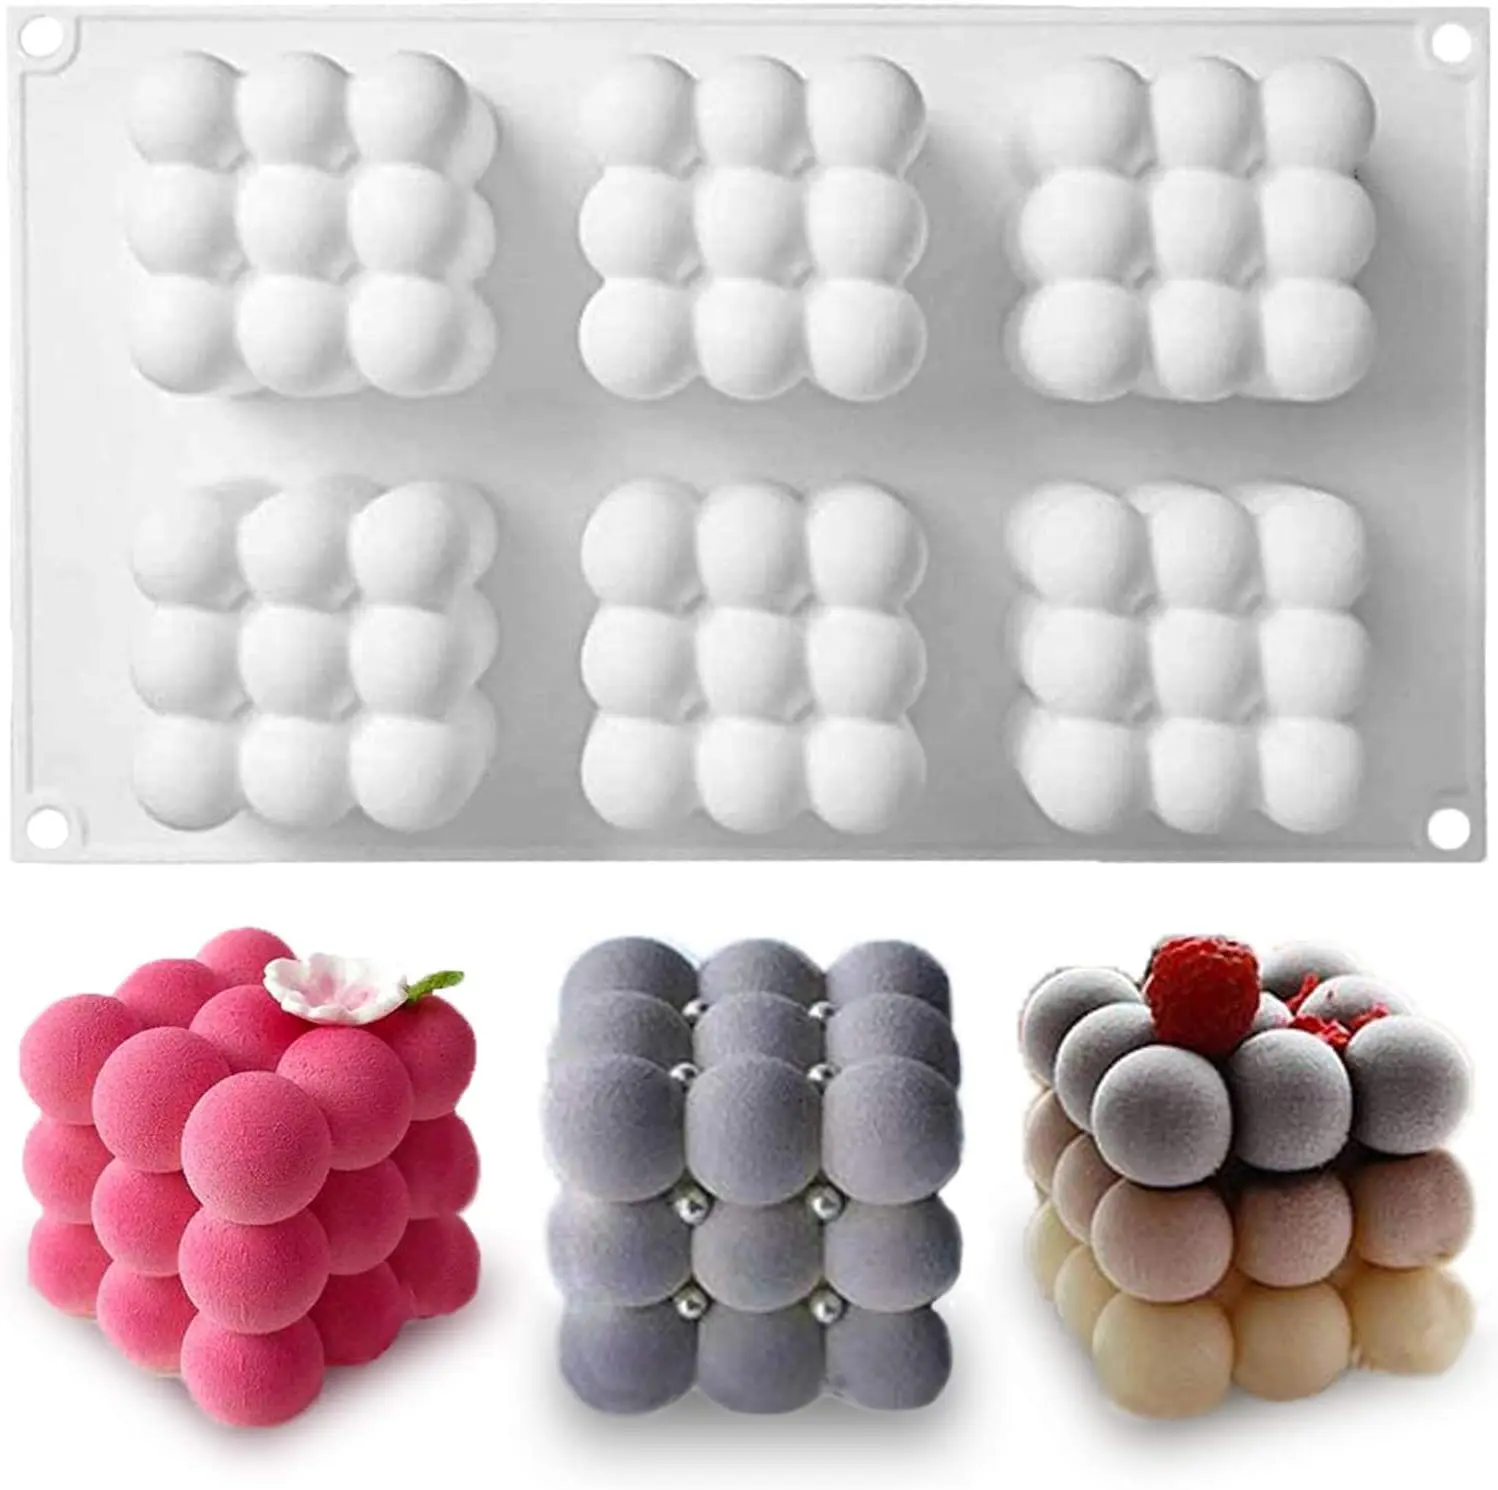 

6 Cavities 3D Cube Baking Mousse Cake Mold Silicone Square Bubble Dessert MoldsTray Kitchen Bakeware Candle Plaster Mould